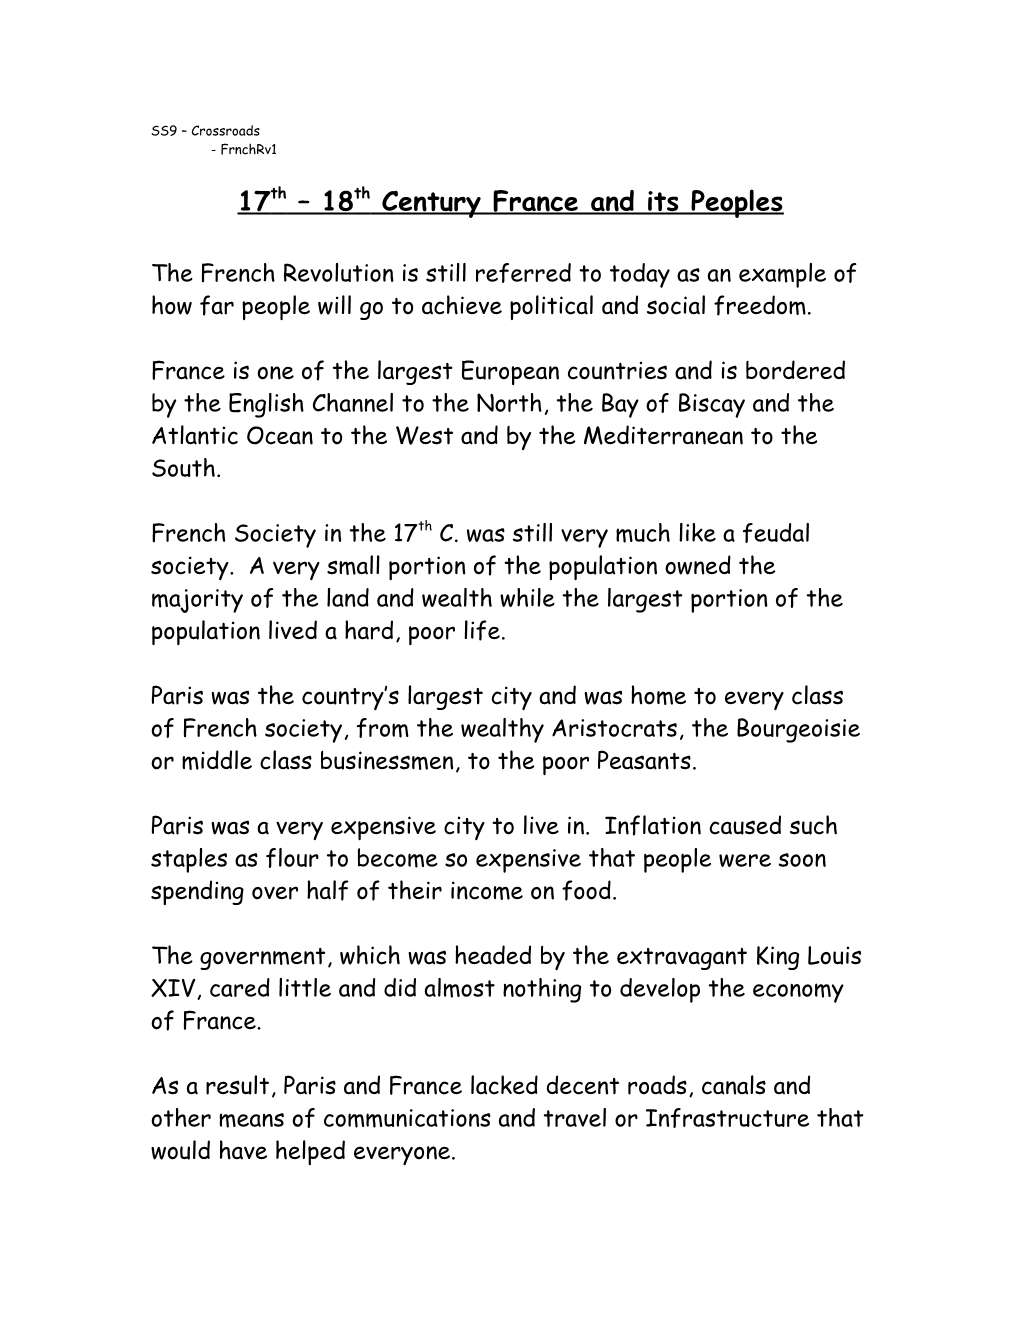 17Th 18Th Century France and Its Peoples